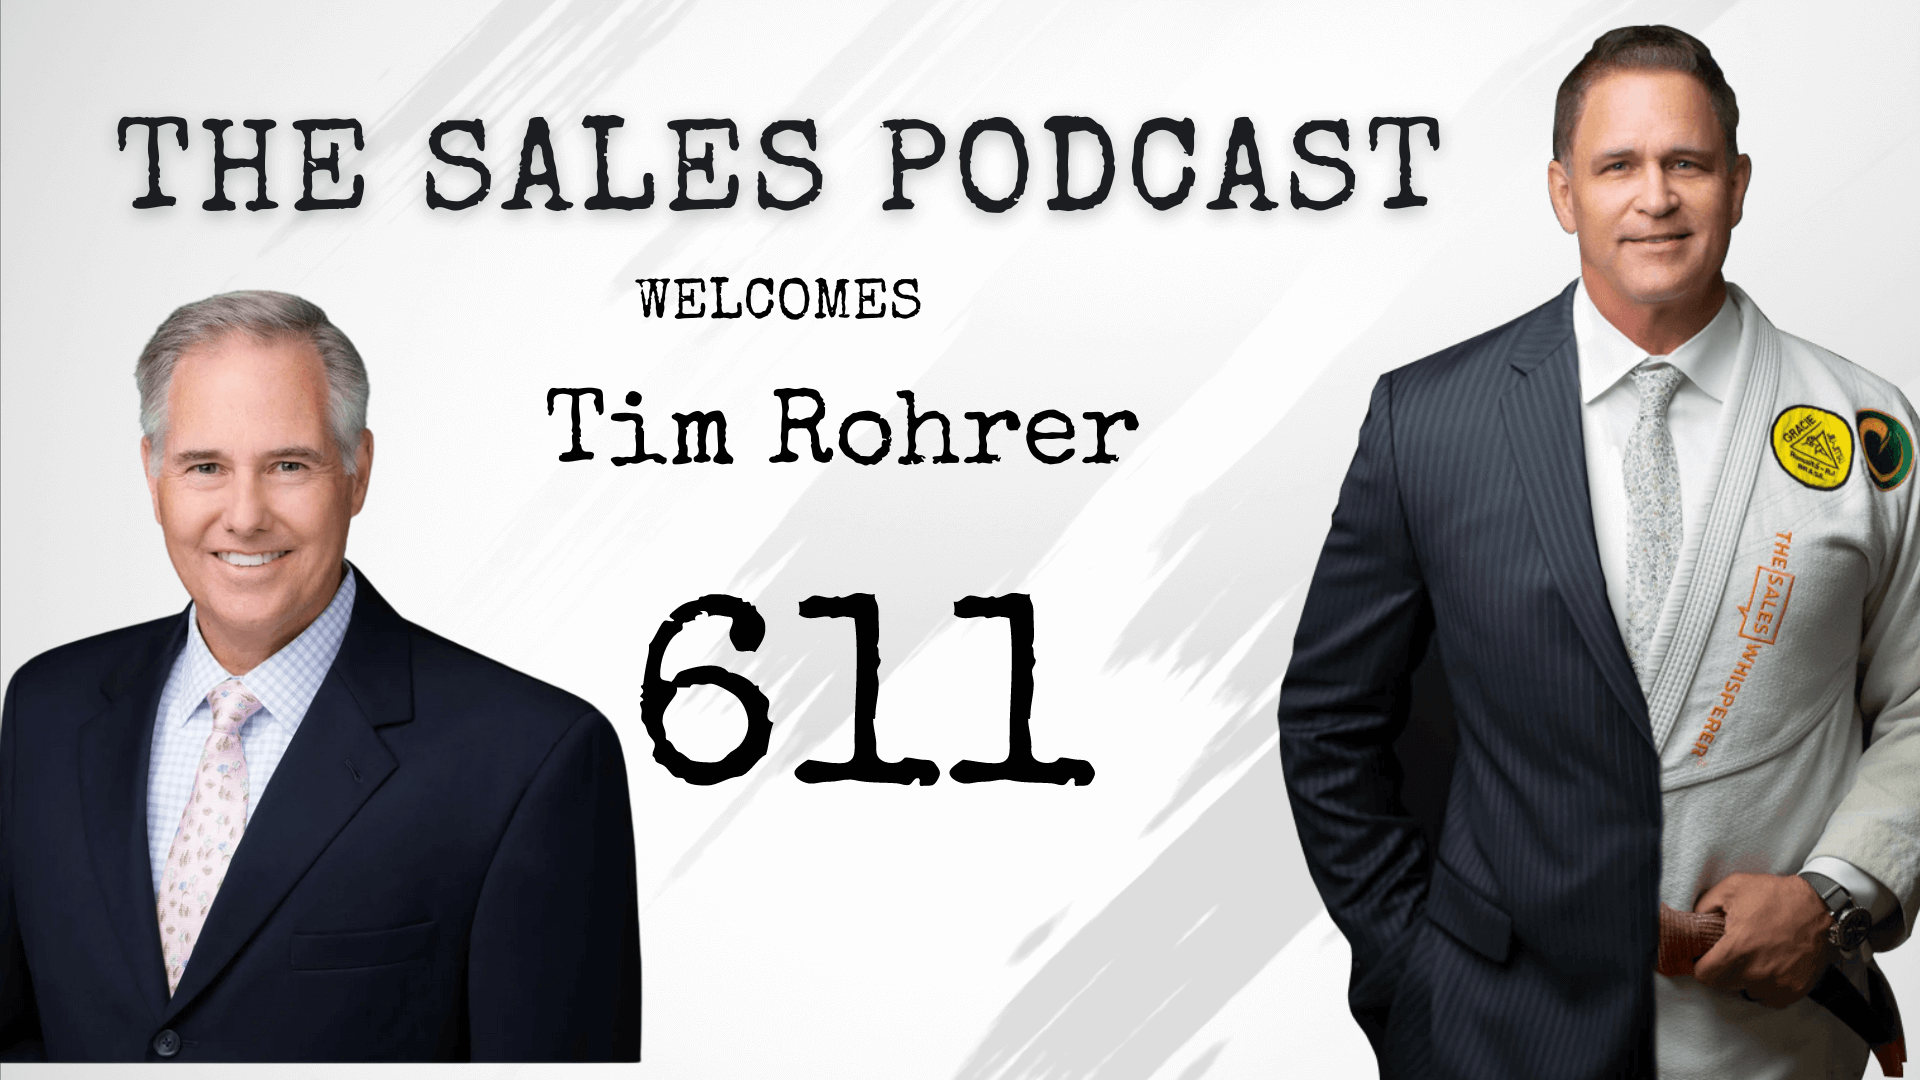 Tim Rohrer Shares 'Sales Lessons of the World's Greatest Mentor' on The Sales Podcast with Wes Schaeffer, The Sales Whisperer® 